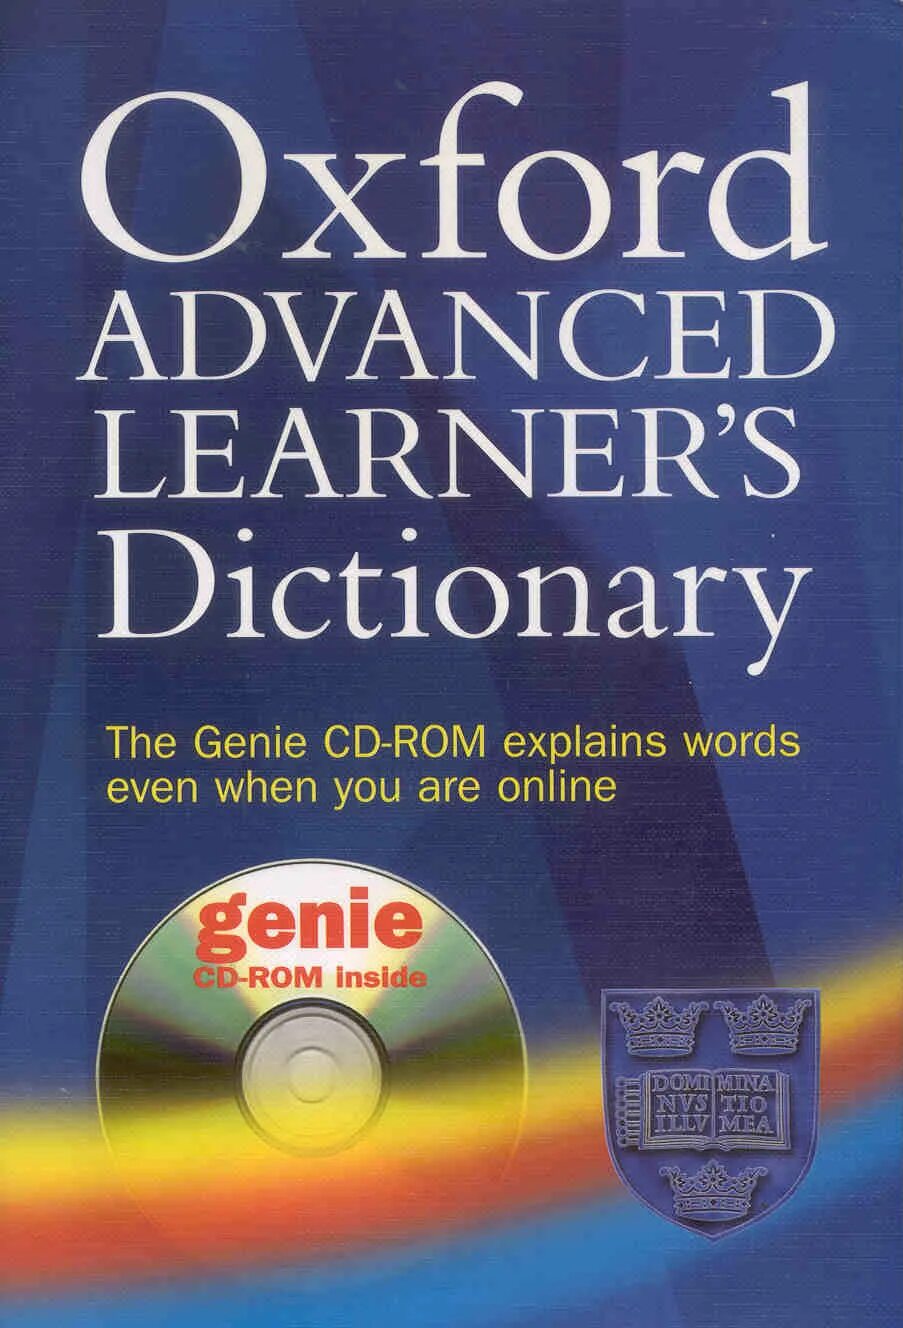 Advanced learner s dictionary. Hornby's Oxford Advanced Learners Dictionary. Oxford Advanced Learner's Dictionary книга. Oxford Advanced Dictionary.